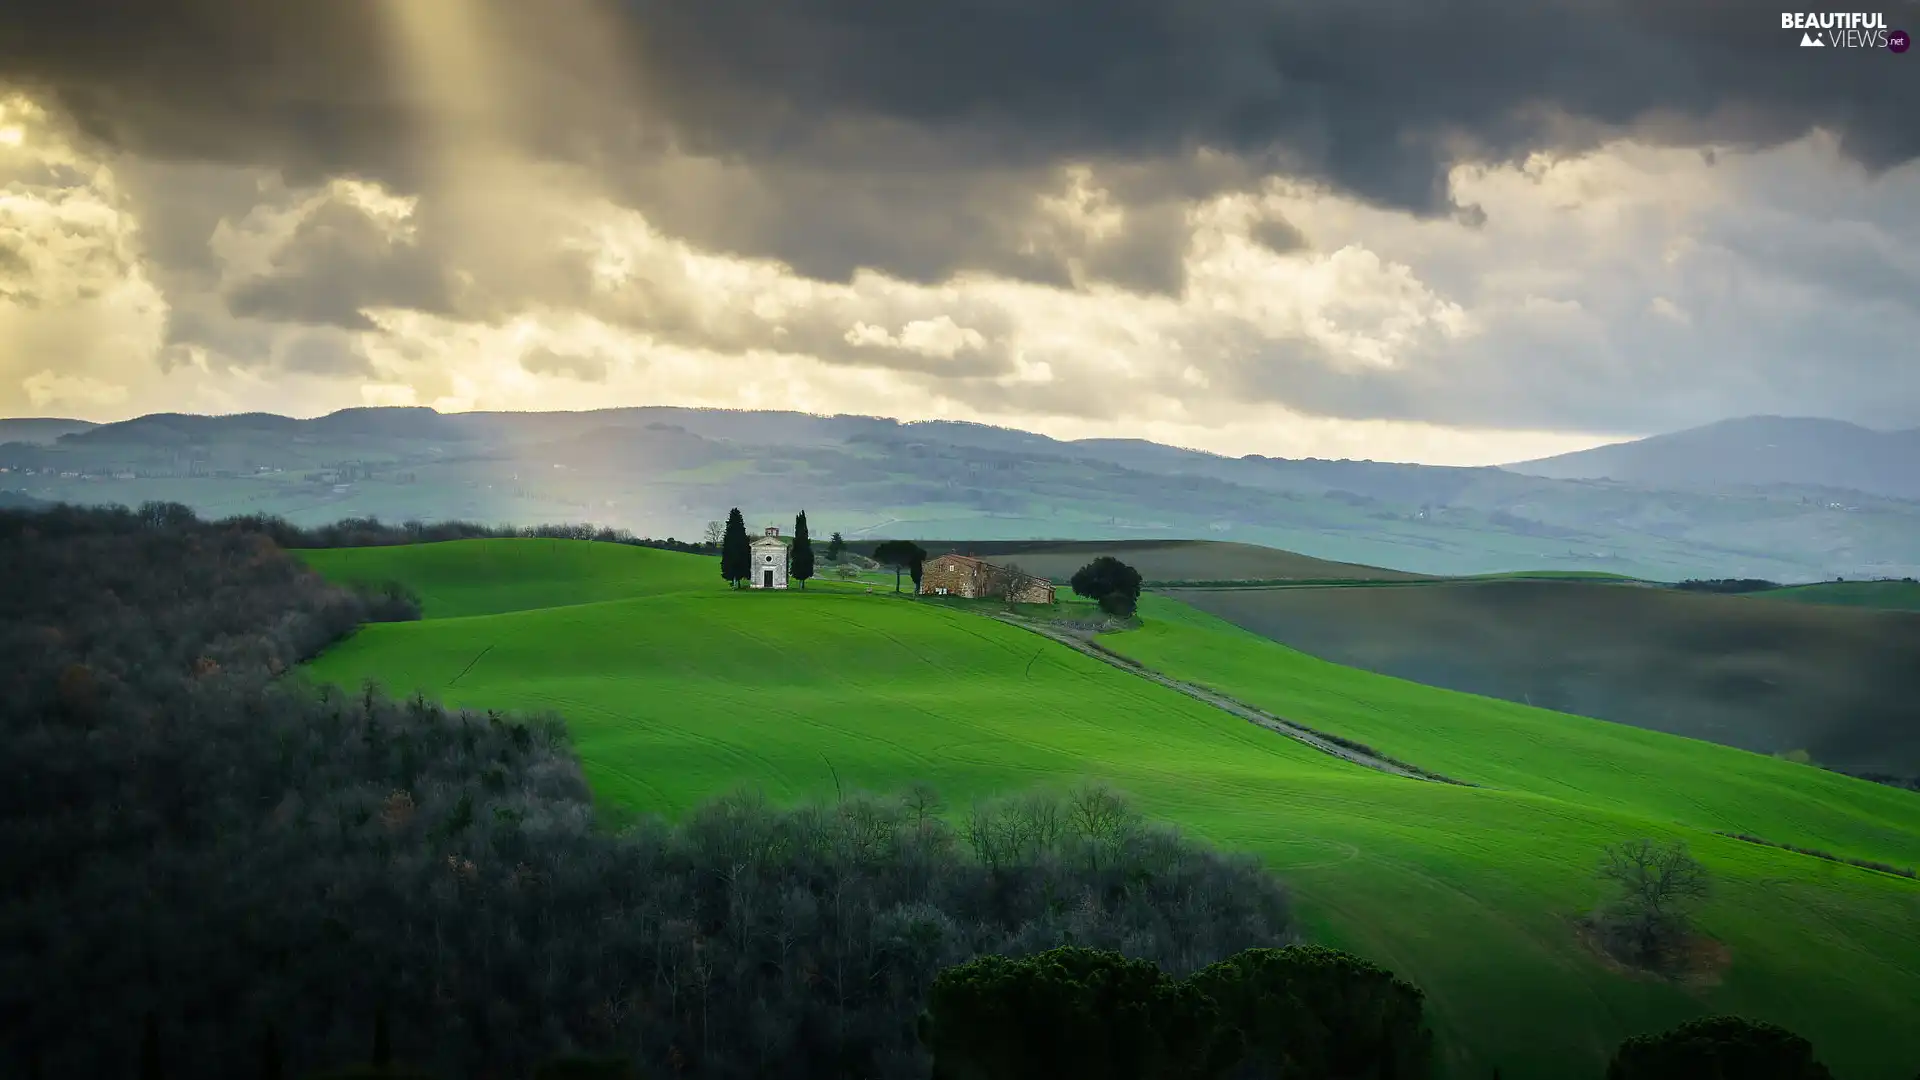 trees, viewes, Italy, house, Tuscany, field, The Hills, clouds